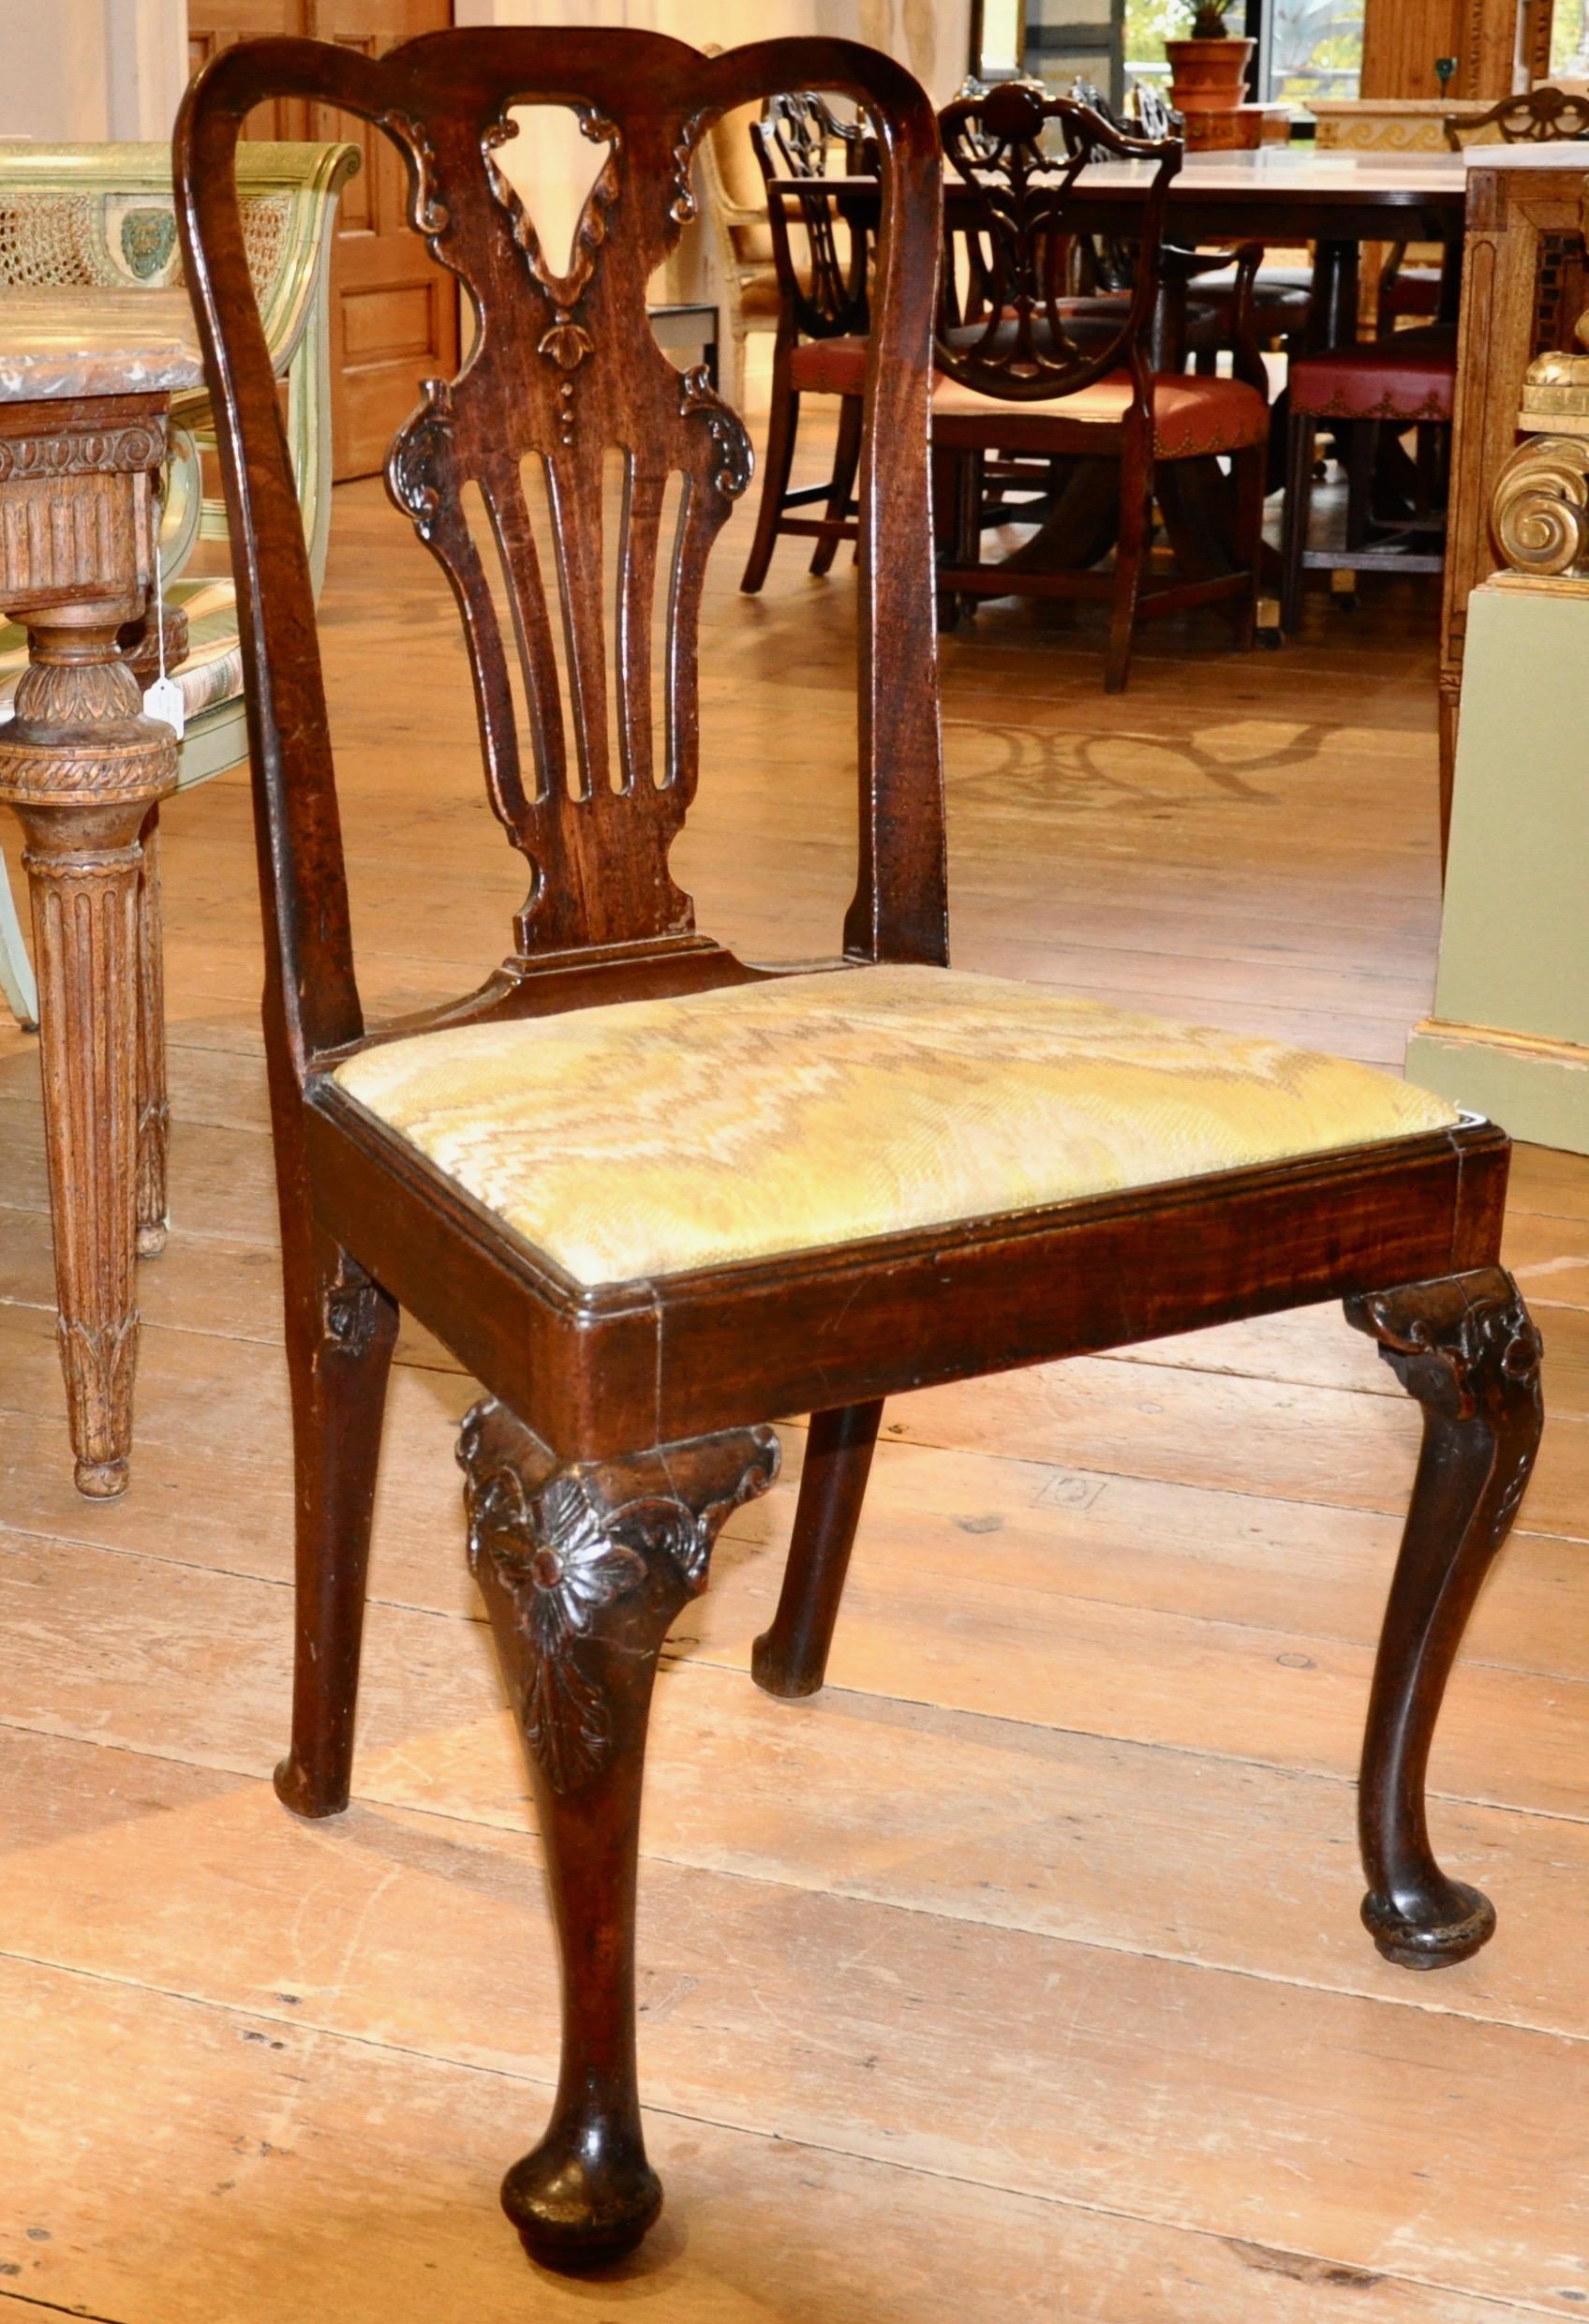 Set of six period English walnut George II side chairs

Six period Georgian side chairs in transitional form moving from Queen Anne to George II in design and age. Original finish. Great patina. Fine condition. Usable and stable and of modern size.